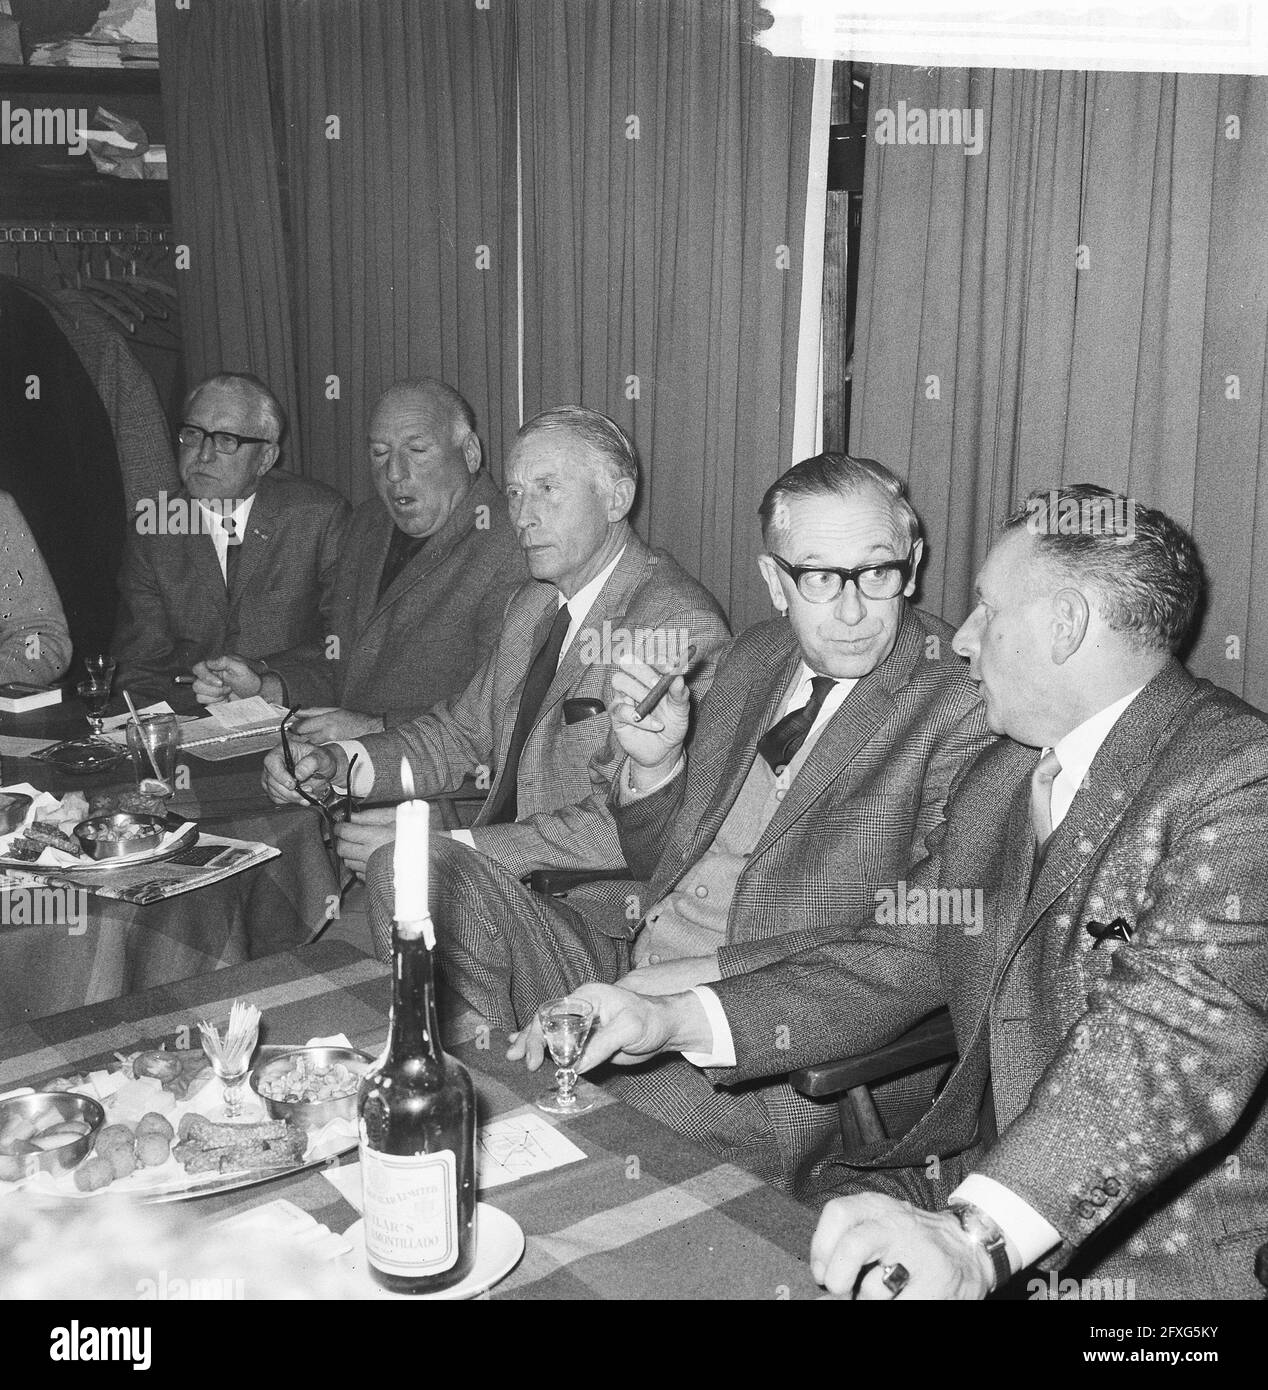 Association Club of the Hundred (fishing); convivial meeting, December 16, 1965, alcoholic beverages, meetings, associations, The Netherlands, 20th century press agency photo, news to remember, documentary, historic photography 1945-1990, visual stories, human history of the Twentieth Century, capturing moments in time Stock Photo